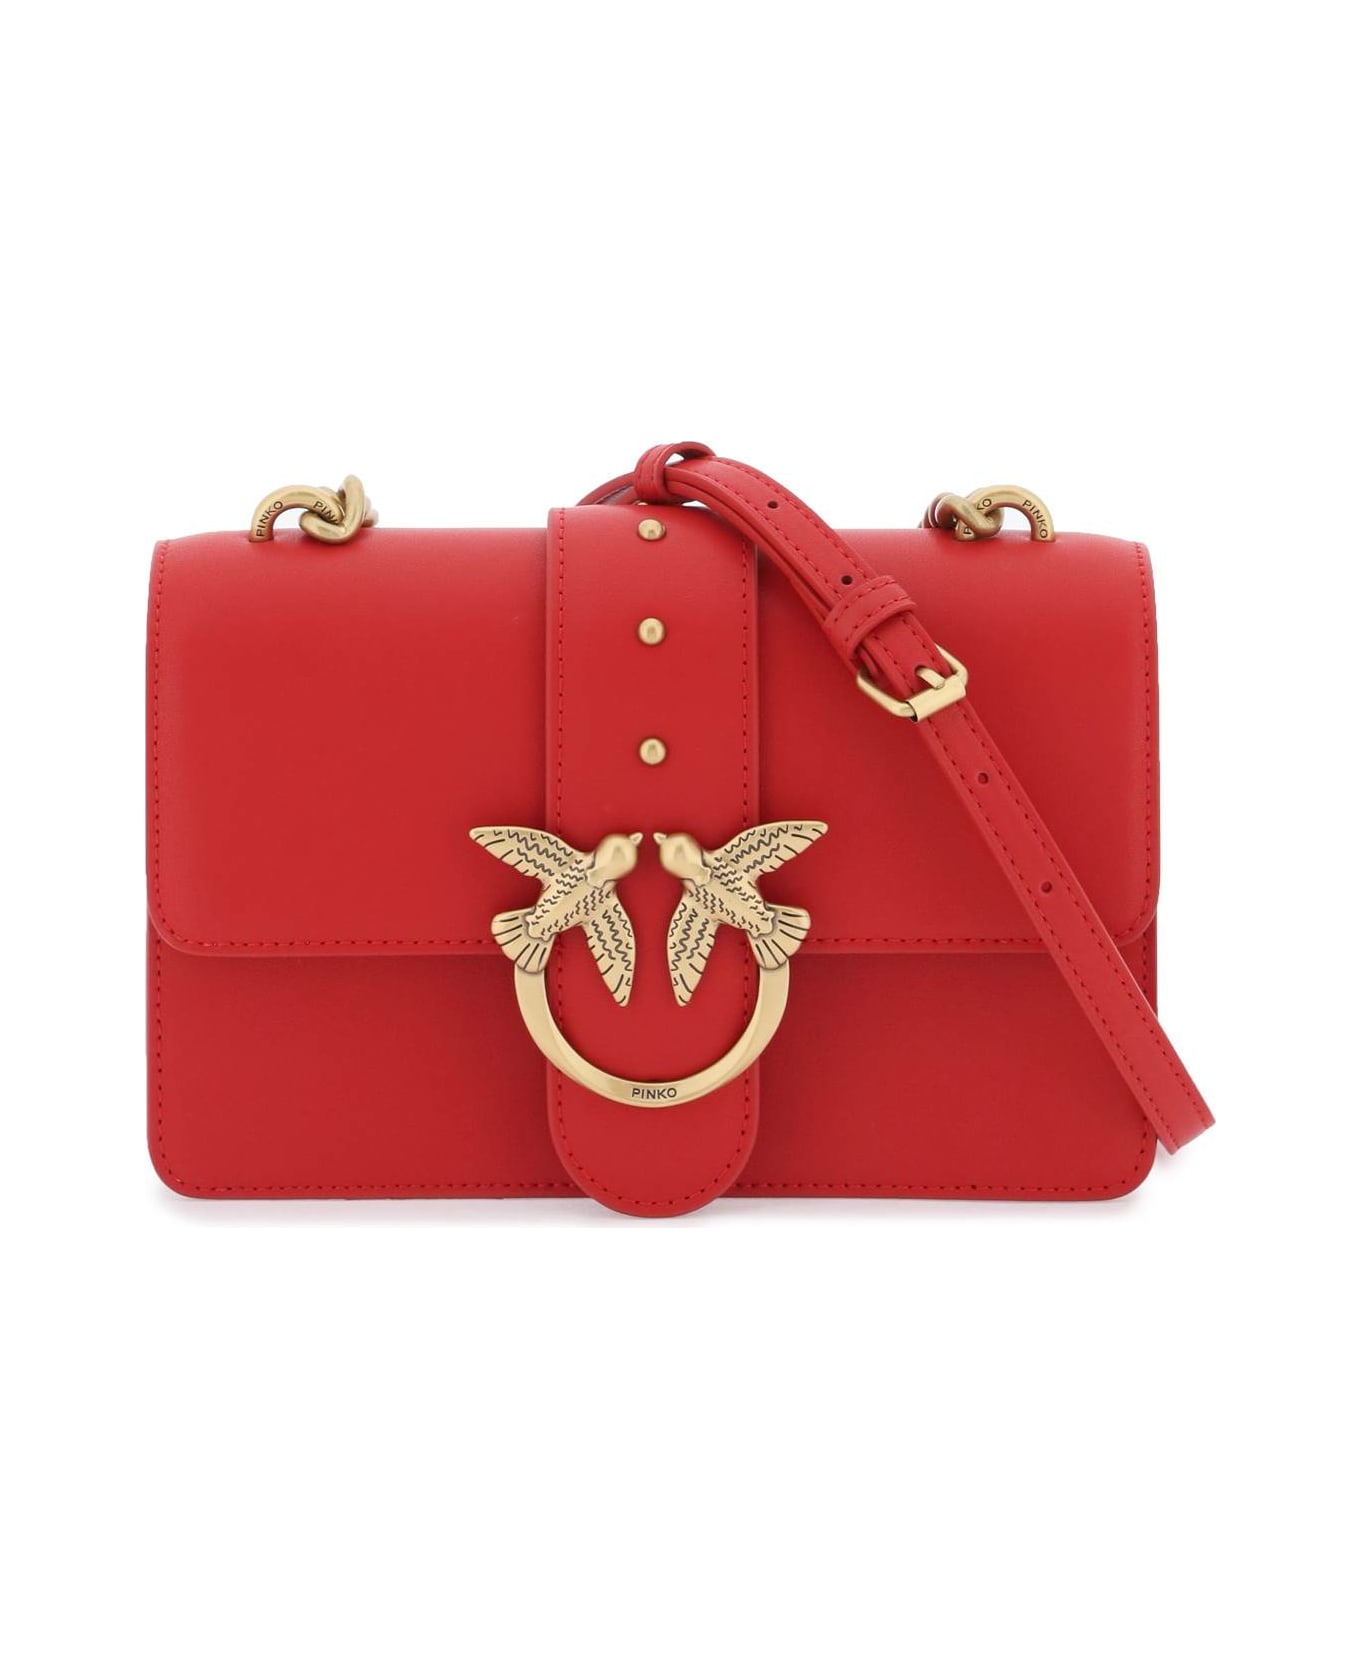 Pinko Love Icon Simply Crossbody Bag - ROSSO ANTIQUE GOLD (Red) ショルダーバッグ